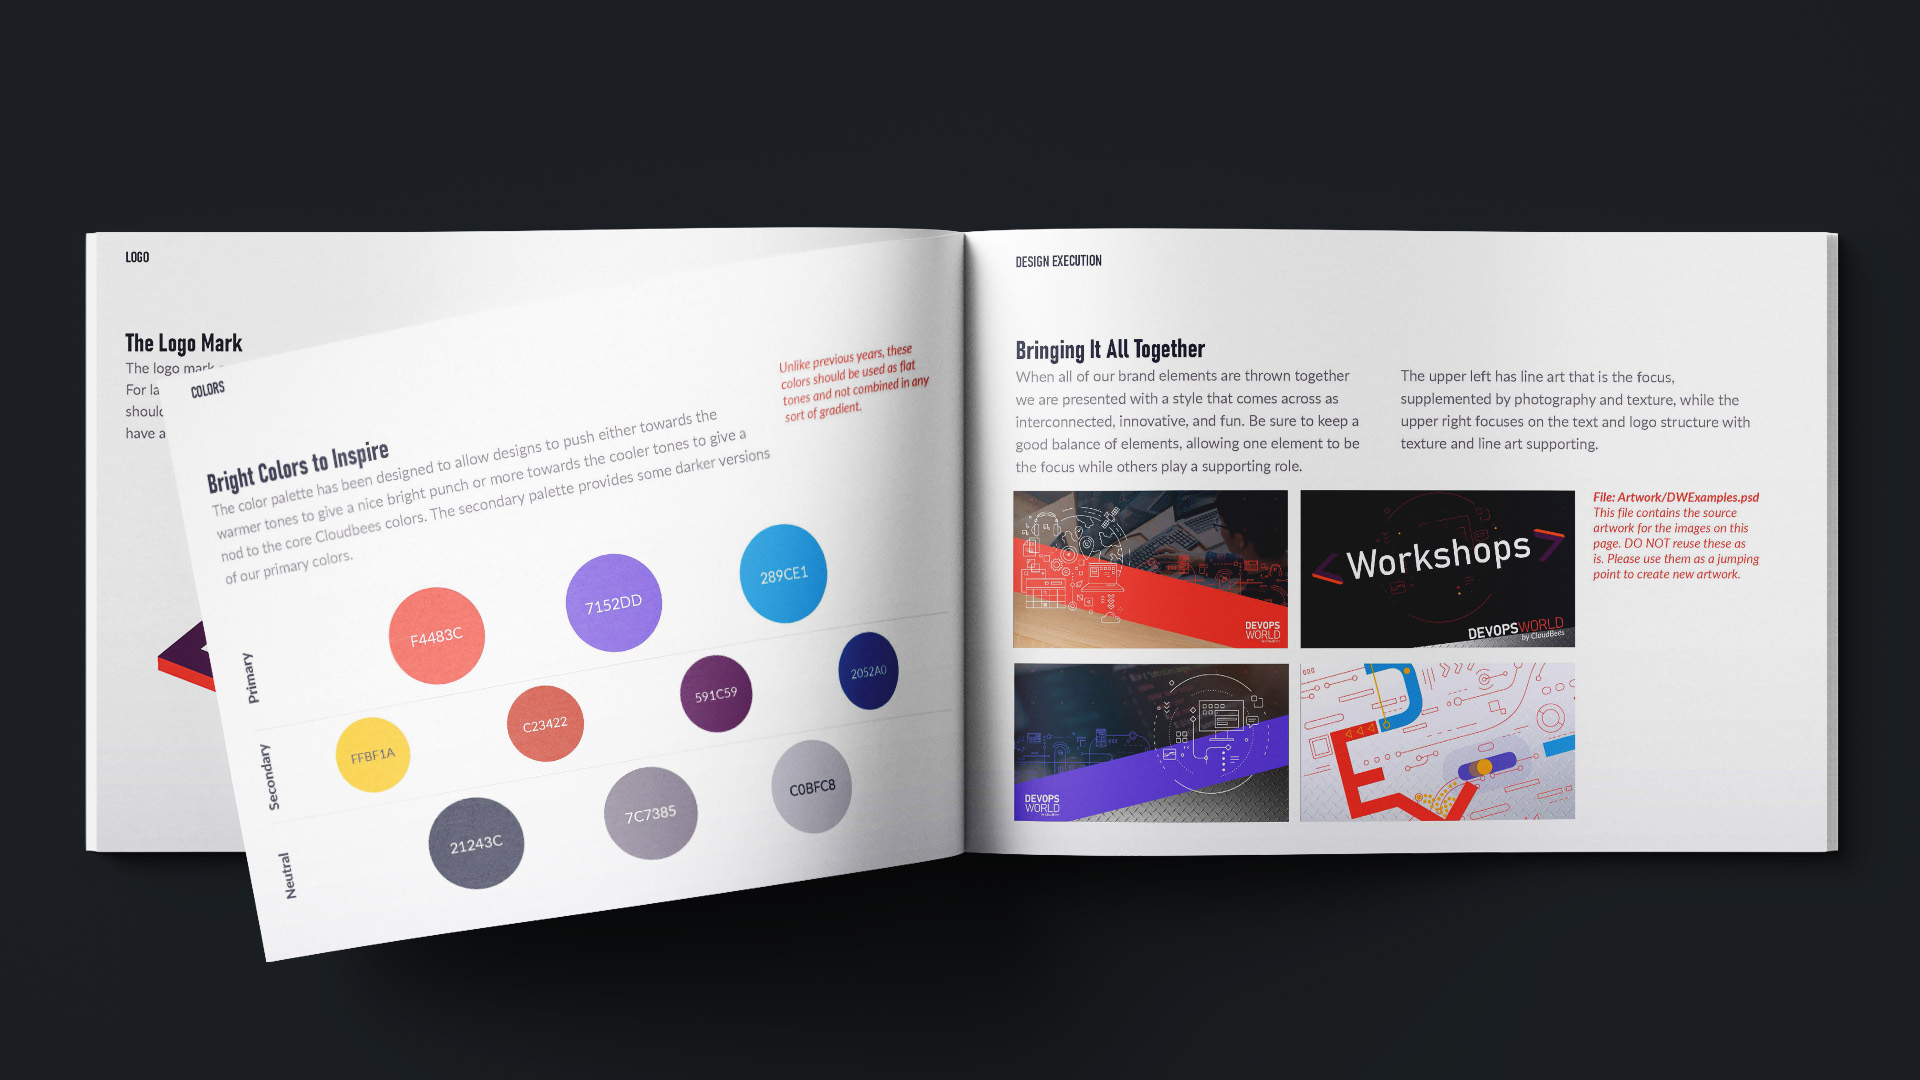 An image of the event brand book created for DevOps World 2020.